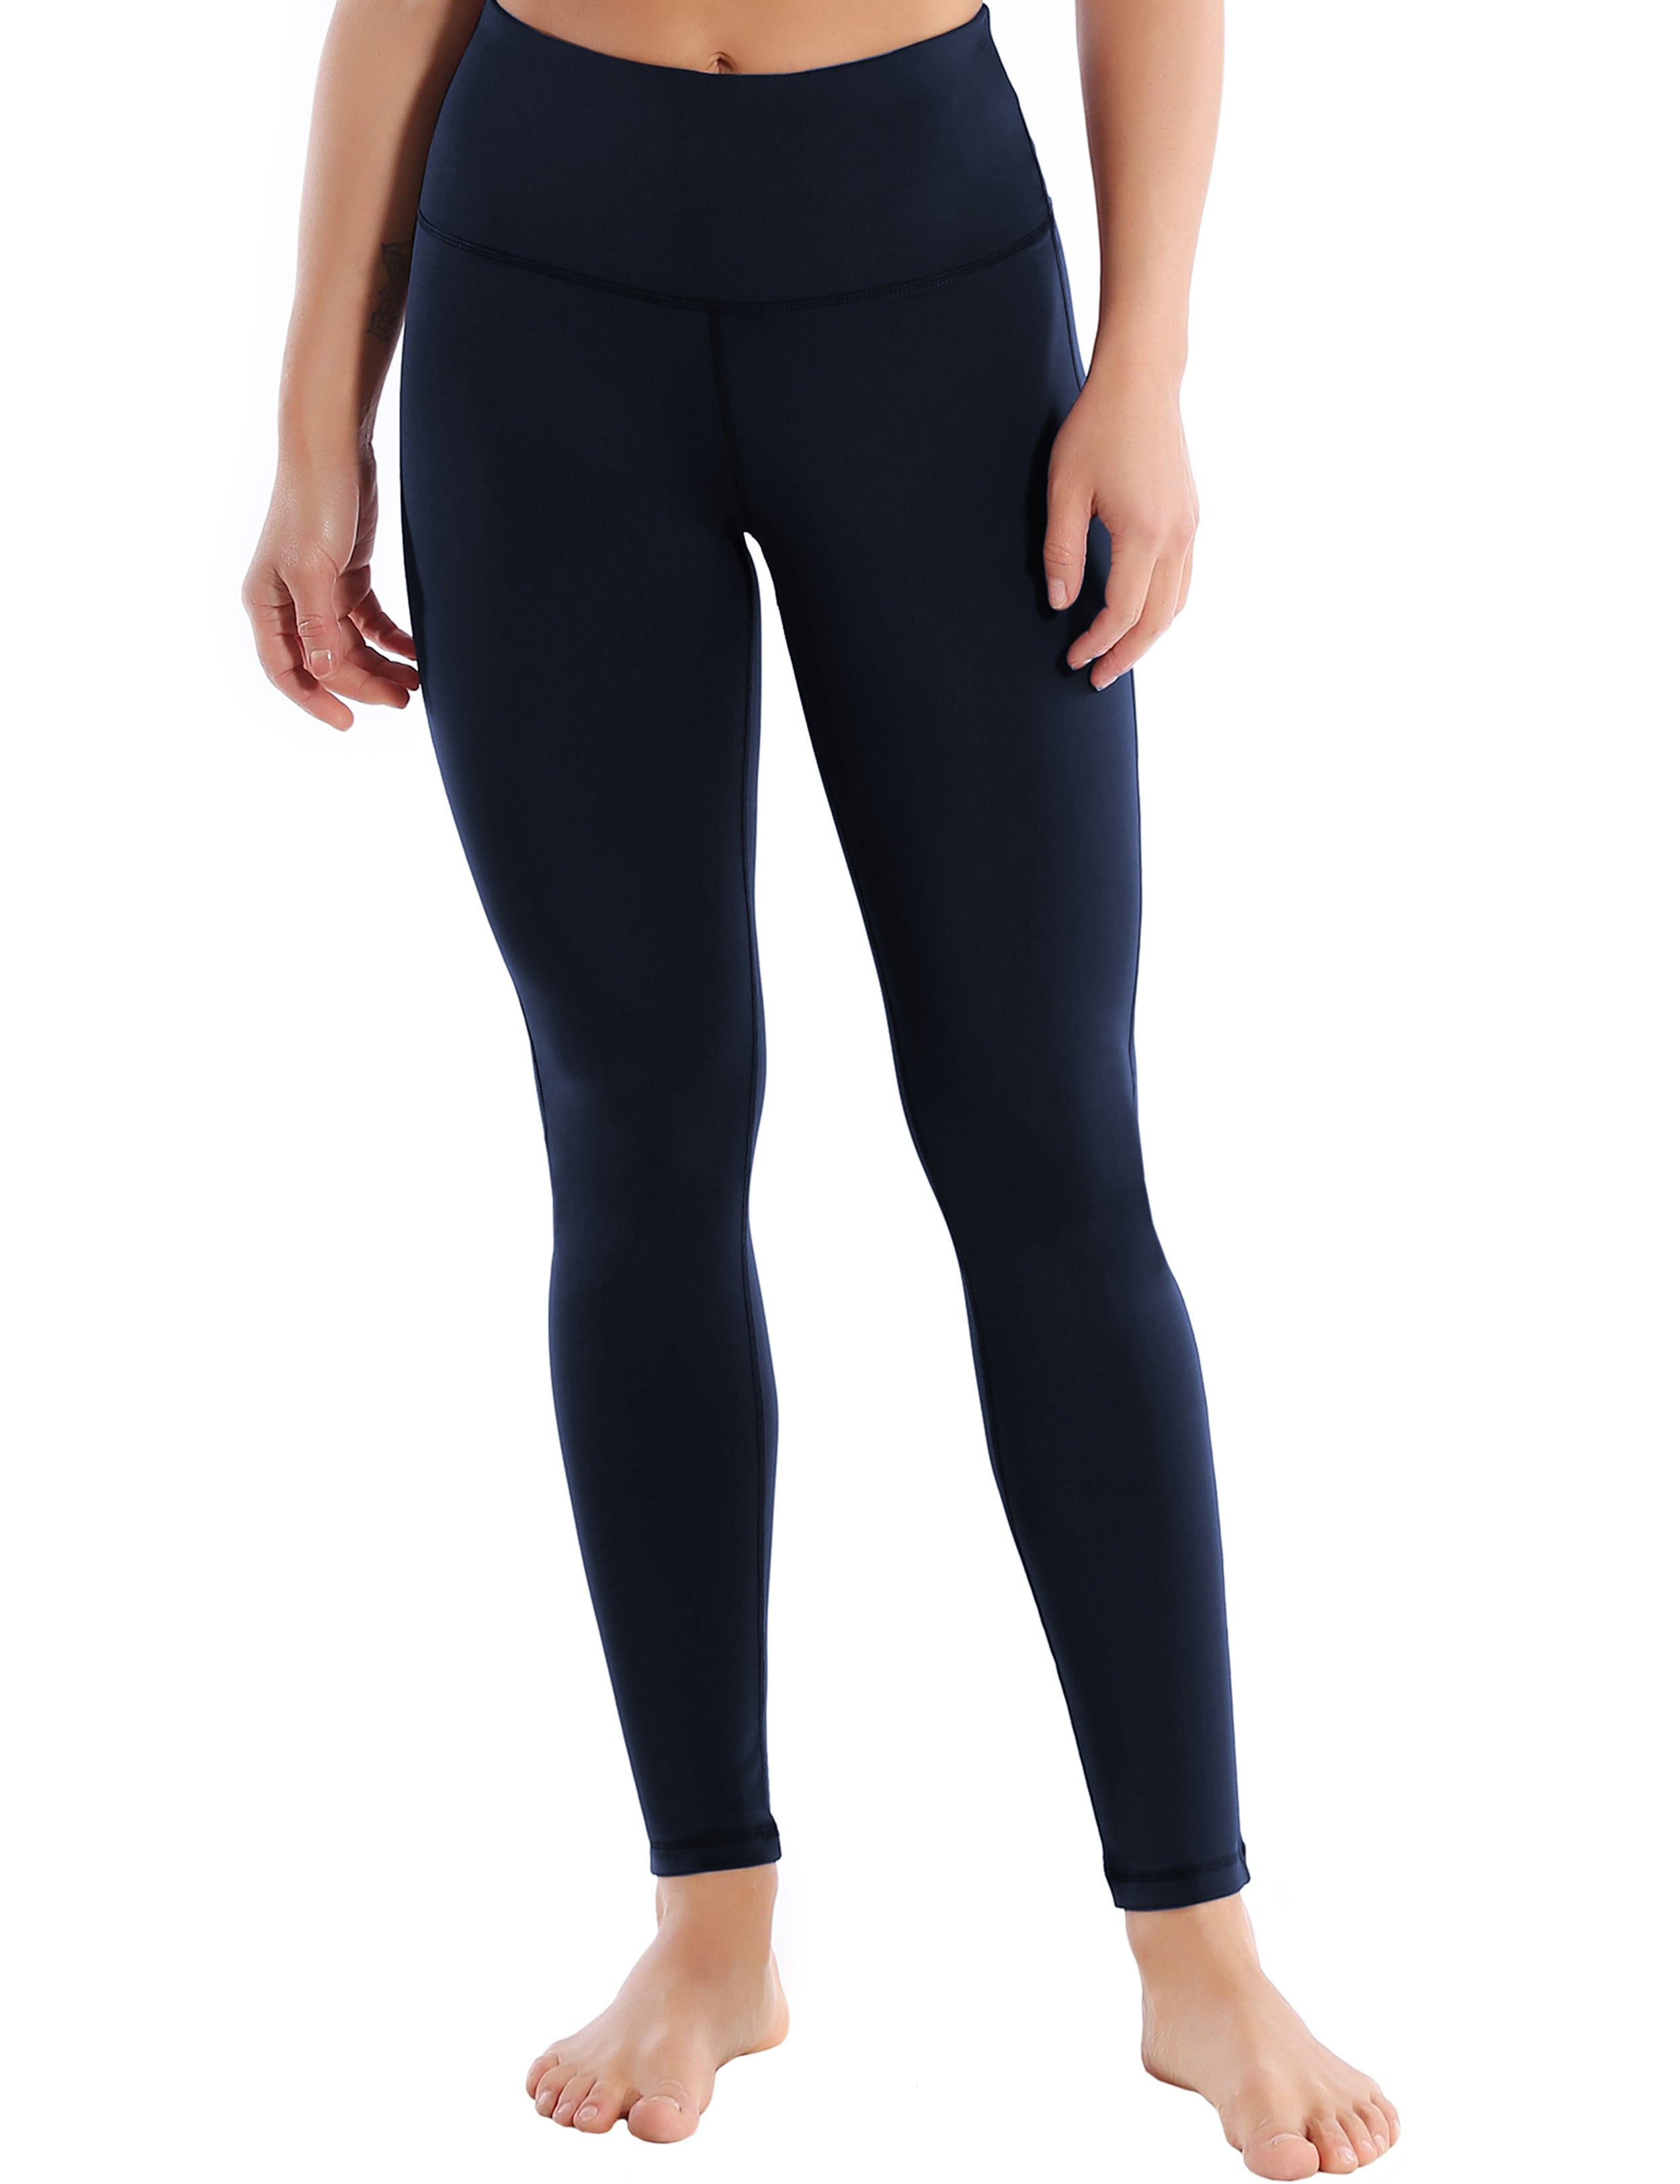 High Waist Side Line Biking Pants darknavy Side Line is Make Your Legs Look Longer and Thinner 75%Nylon/25%Spandex Fabric doesn't attract lint easily 4-way stretch No see-through Moisture-wicking Tummy control Inner pocket Two lengths